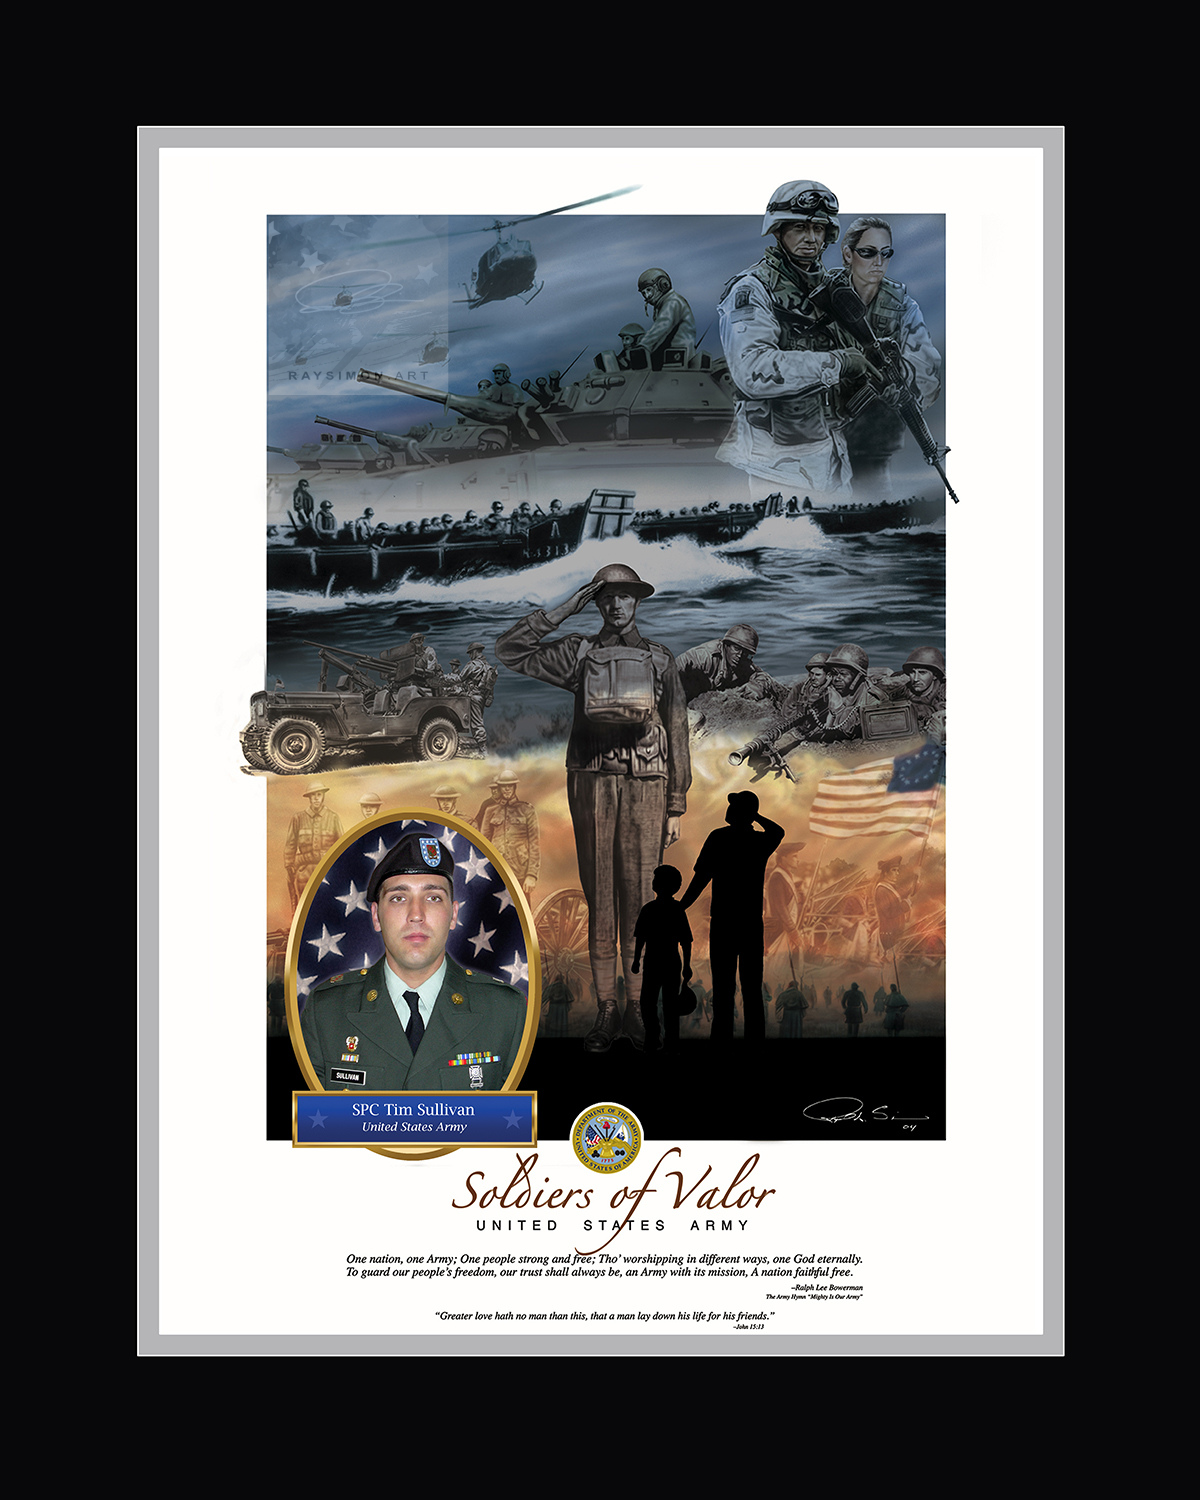 Army Artwork - 'Soldiers of Valor'